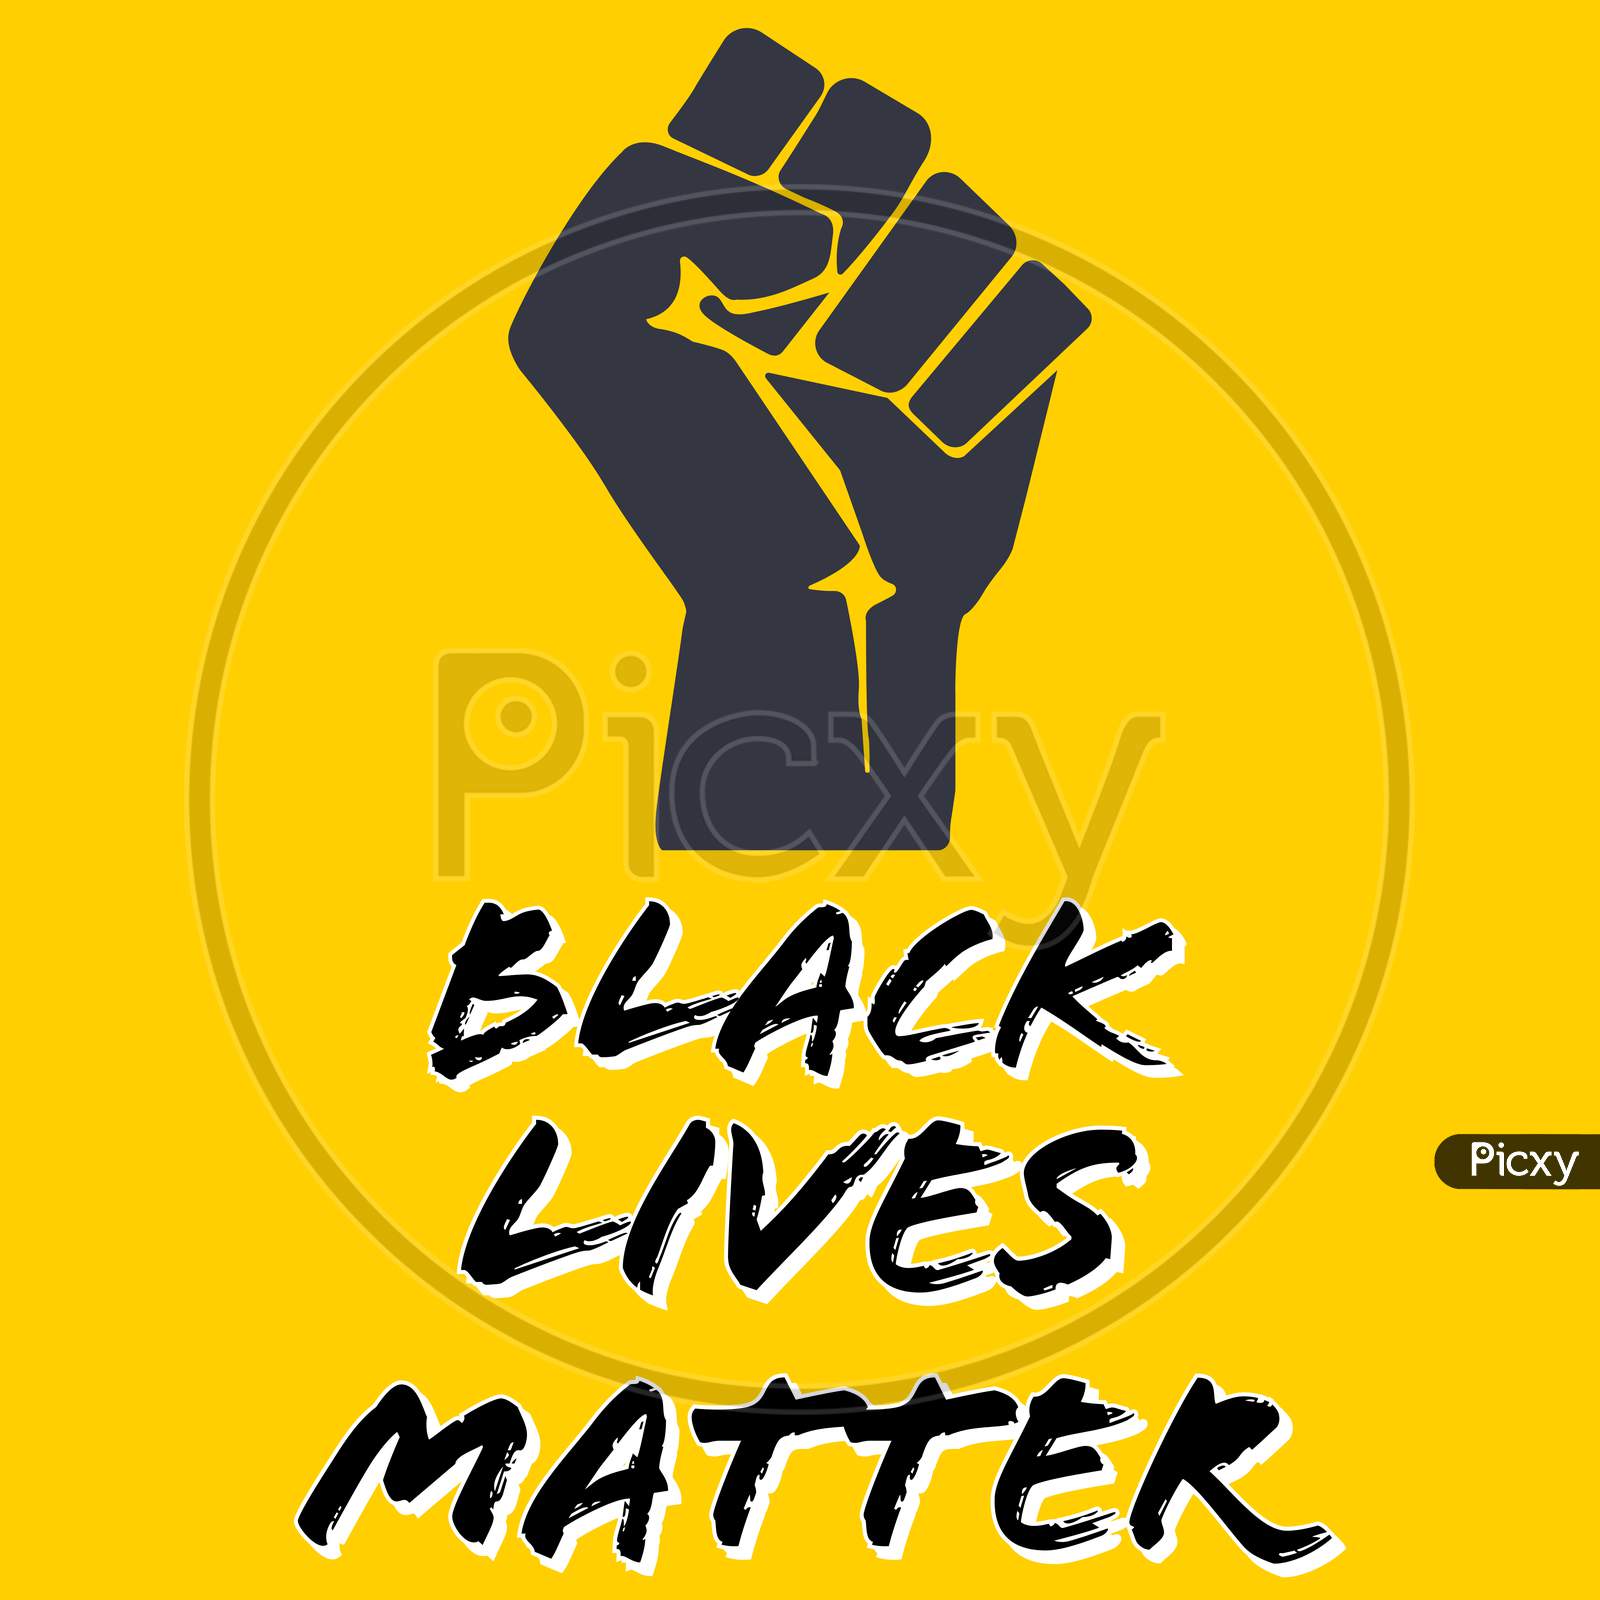 BLACK LIVES MATTER illustration with fist icon illustration in yellow background. Black lives matter rendering.